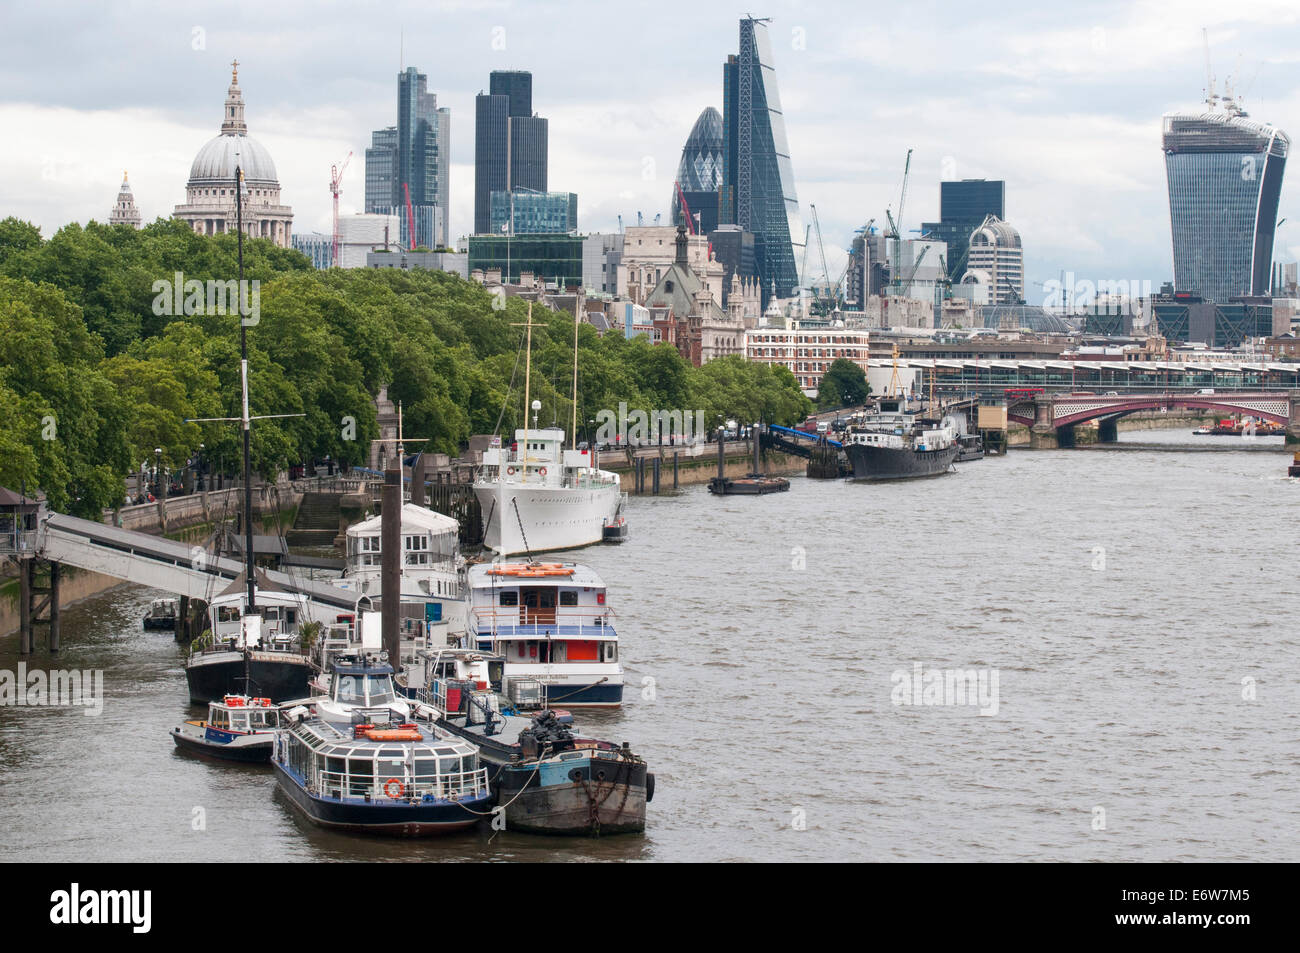 Looking east down the Thames, London. Landmarks on the north bank include the 'Gherkin' building and St Paul's Cathedral. Stock Photo